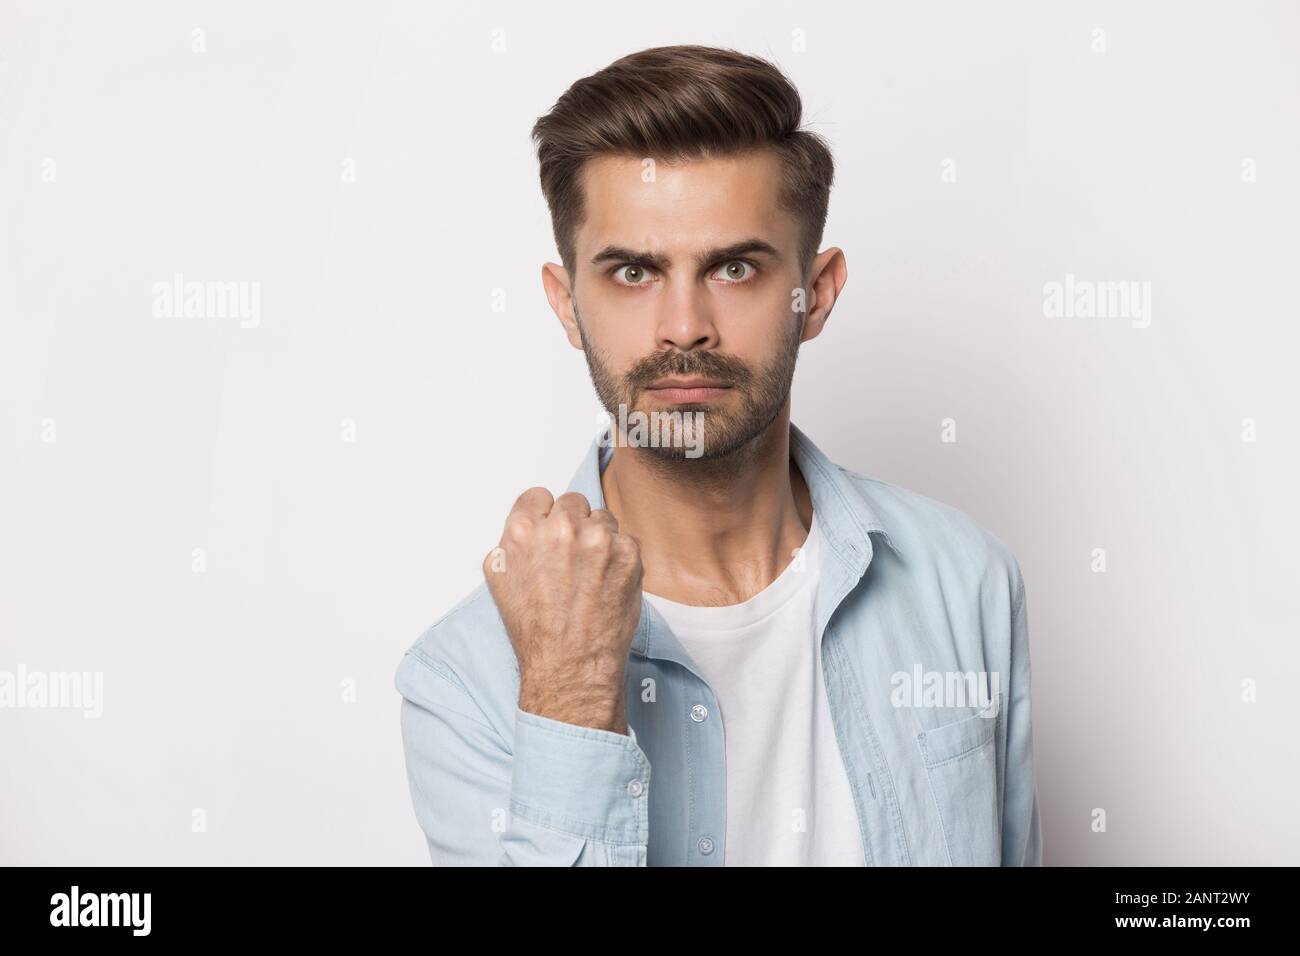 Angry young guy squeezing hand into fist, showing power. Stock Photo